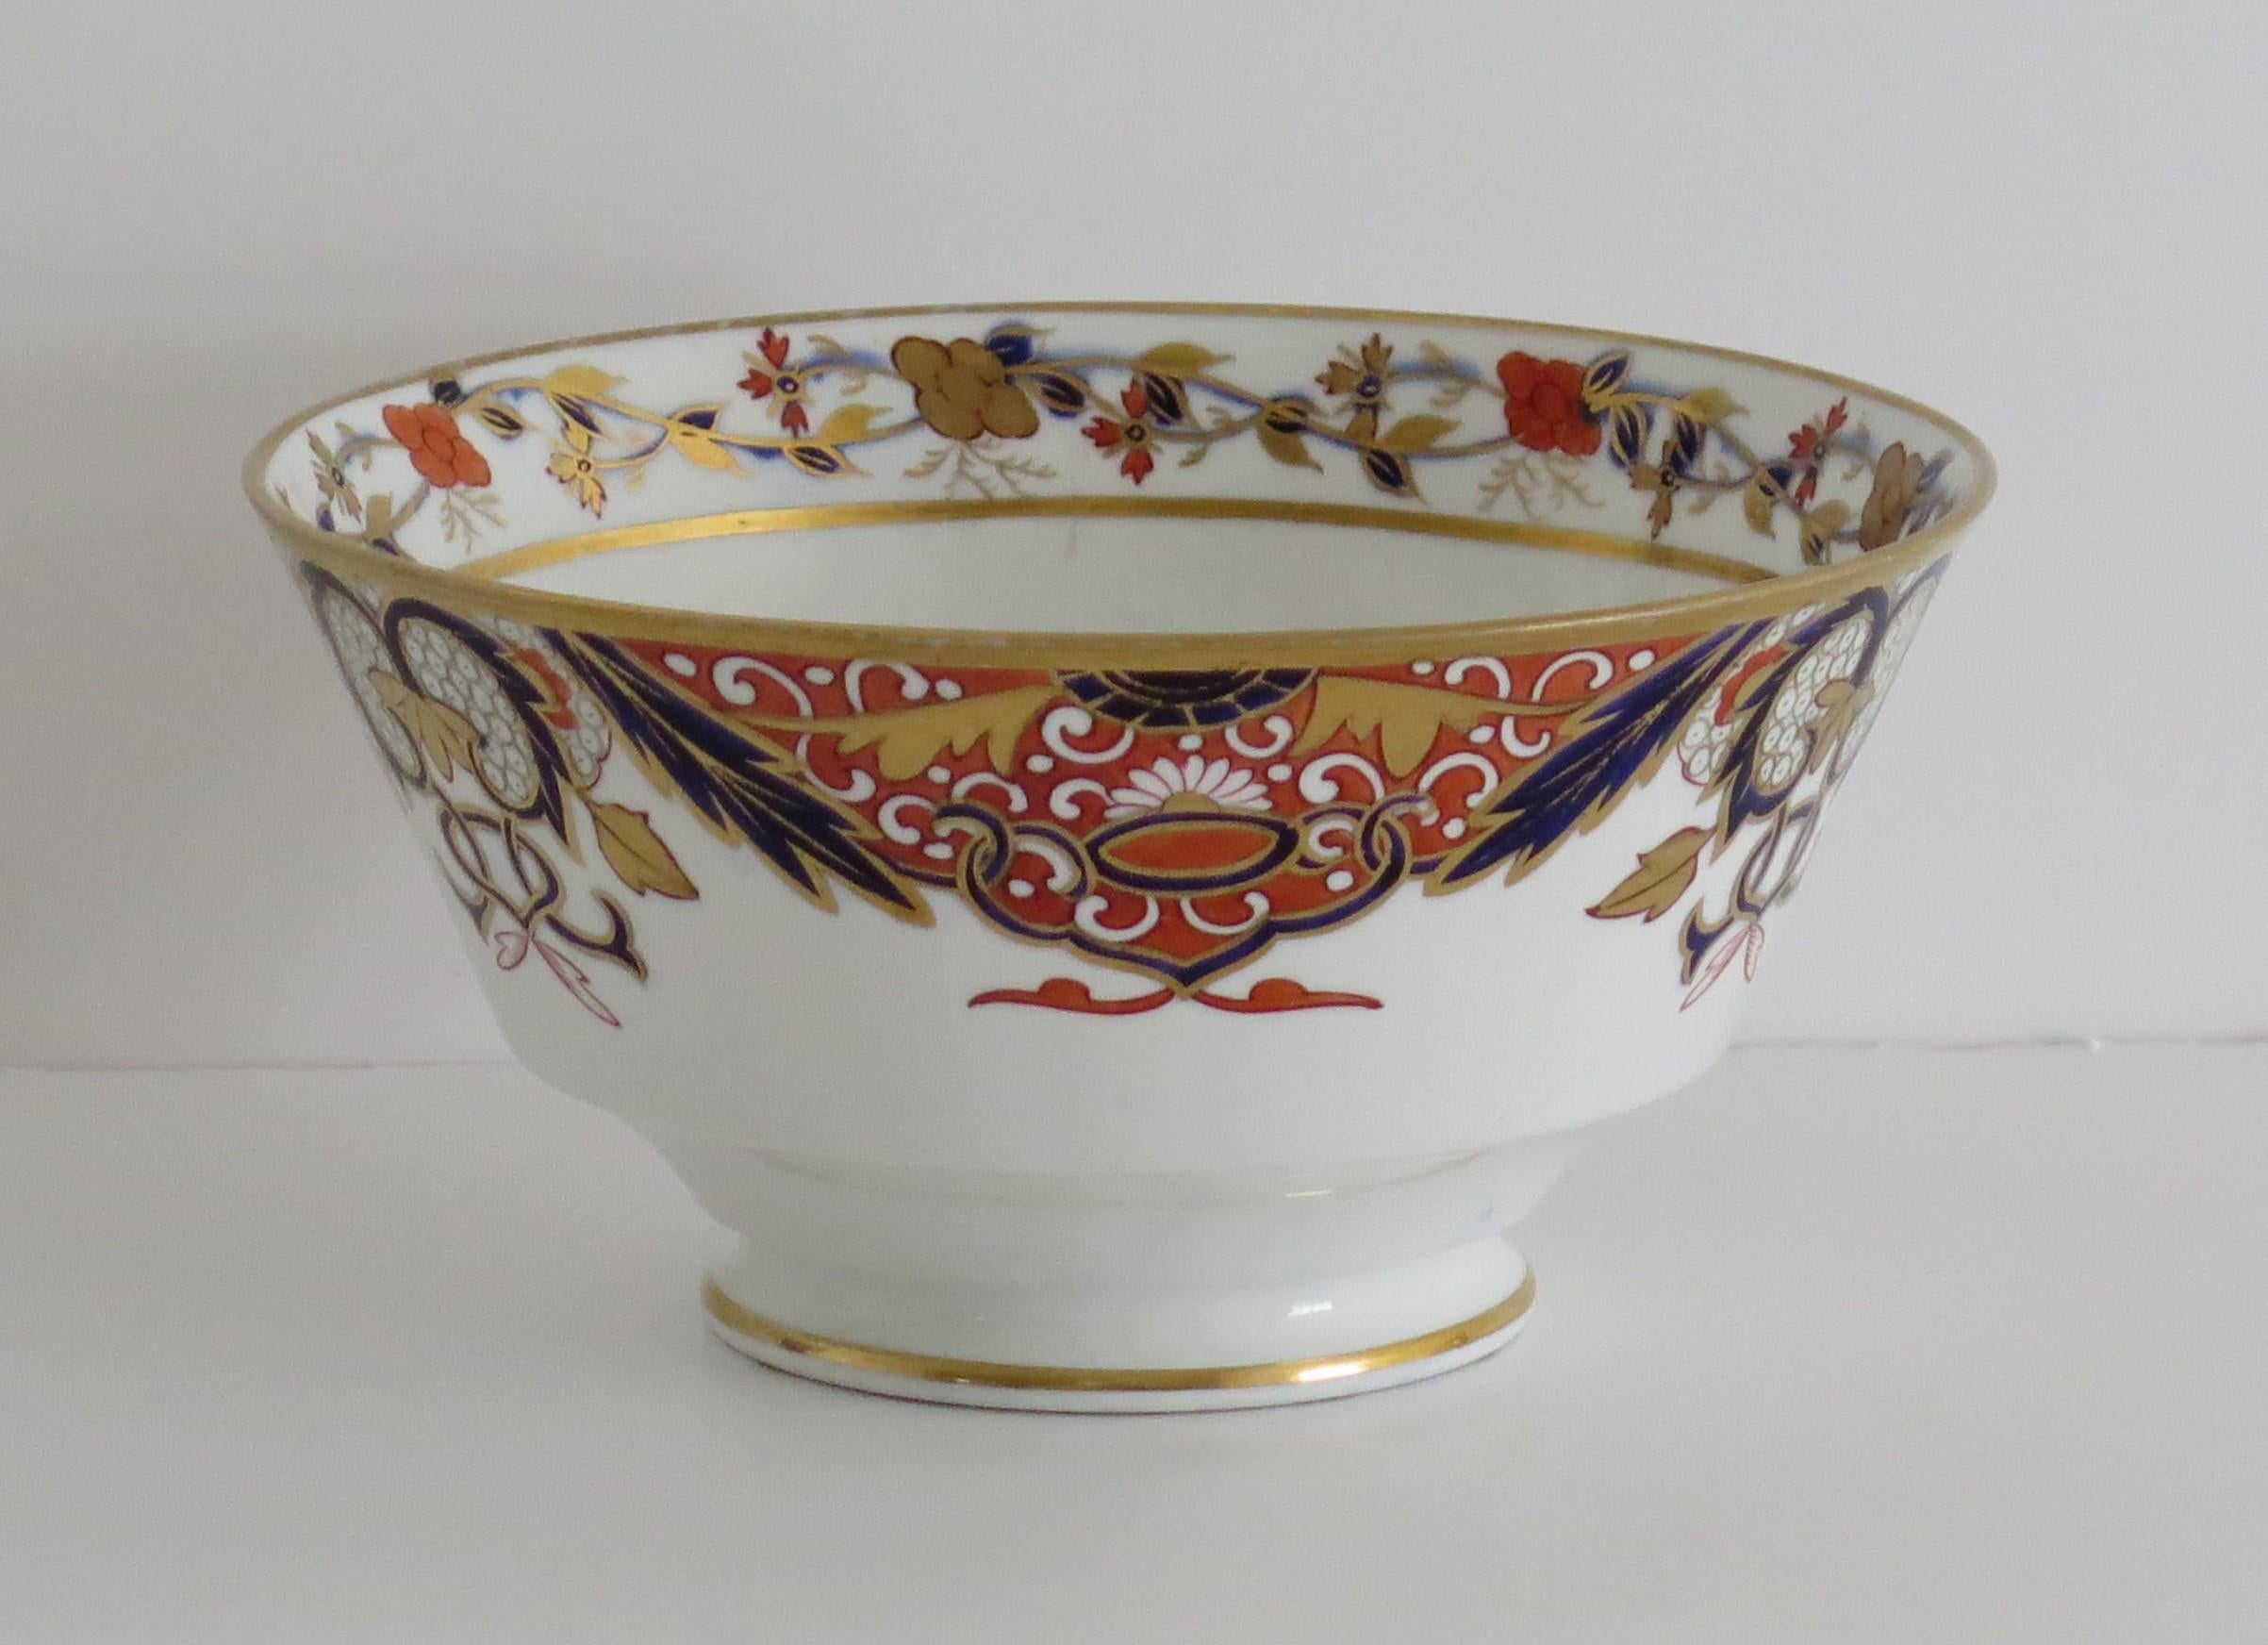 This is a very good rare example of an English George III period, porcelain, slop bowl, made by Spode in the early 19th century, circa 1810.

The bowl is well potted on a low everted foot.

The bowl has a fine and beautifully hand painted 